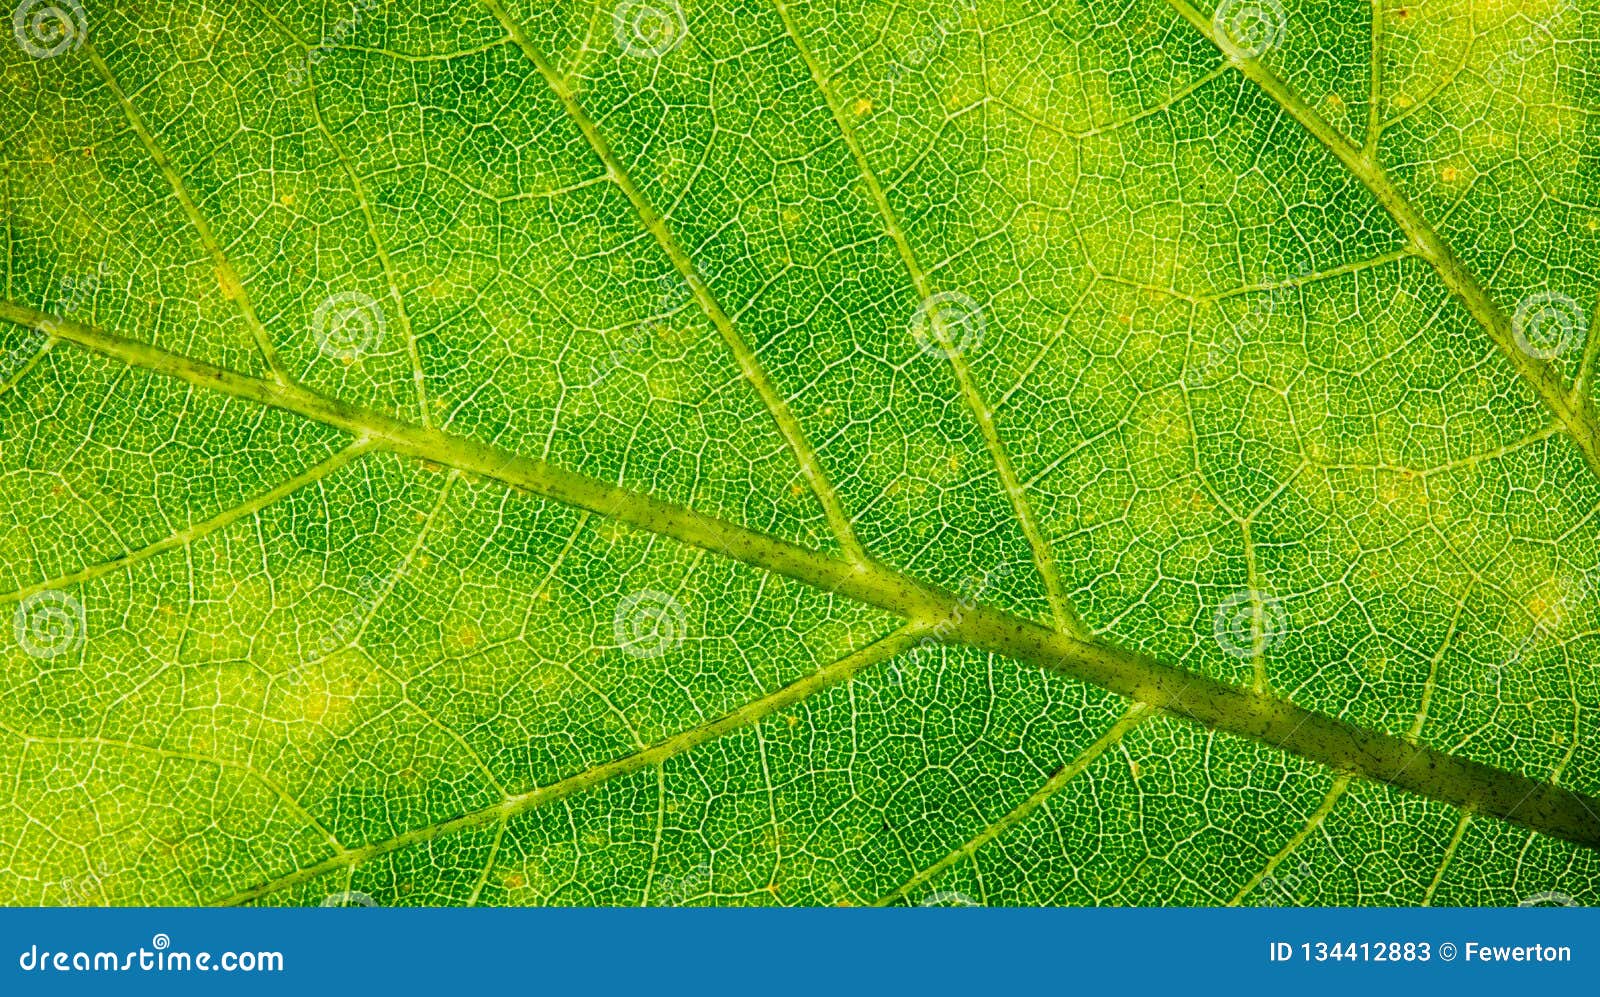 green leaf fresh detailed rugged surface structure extreme macro closeup photo with midrib, leaf veins and grooves texture